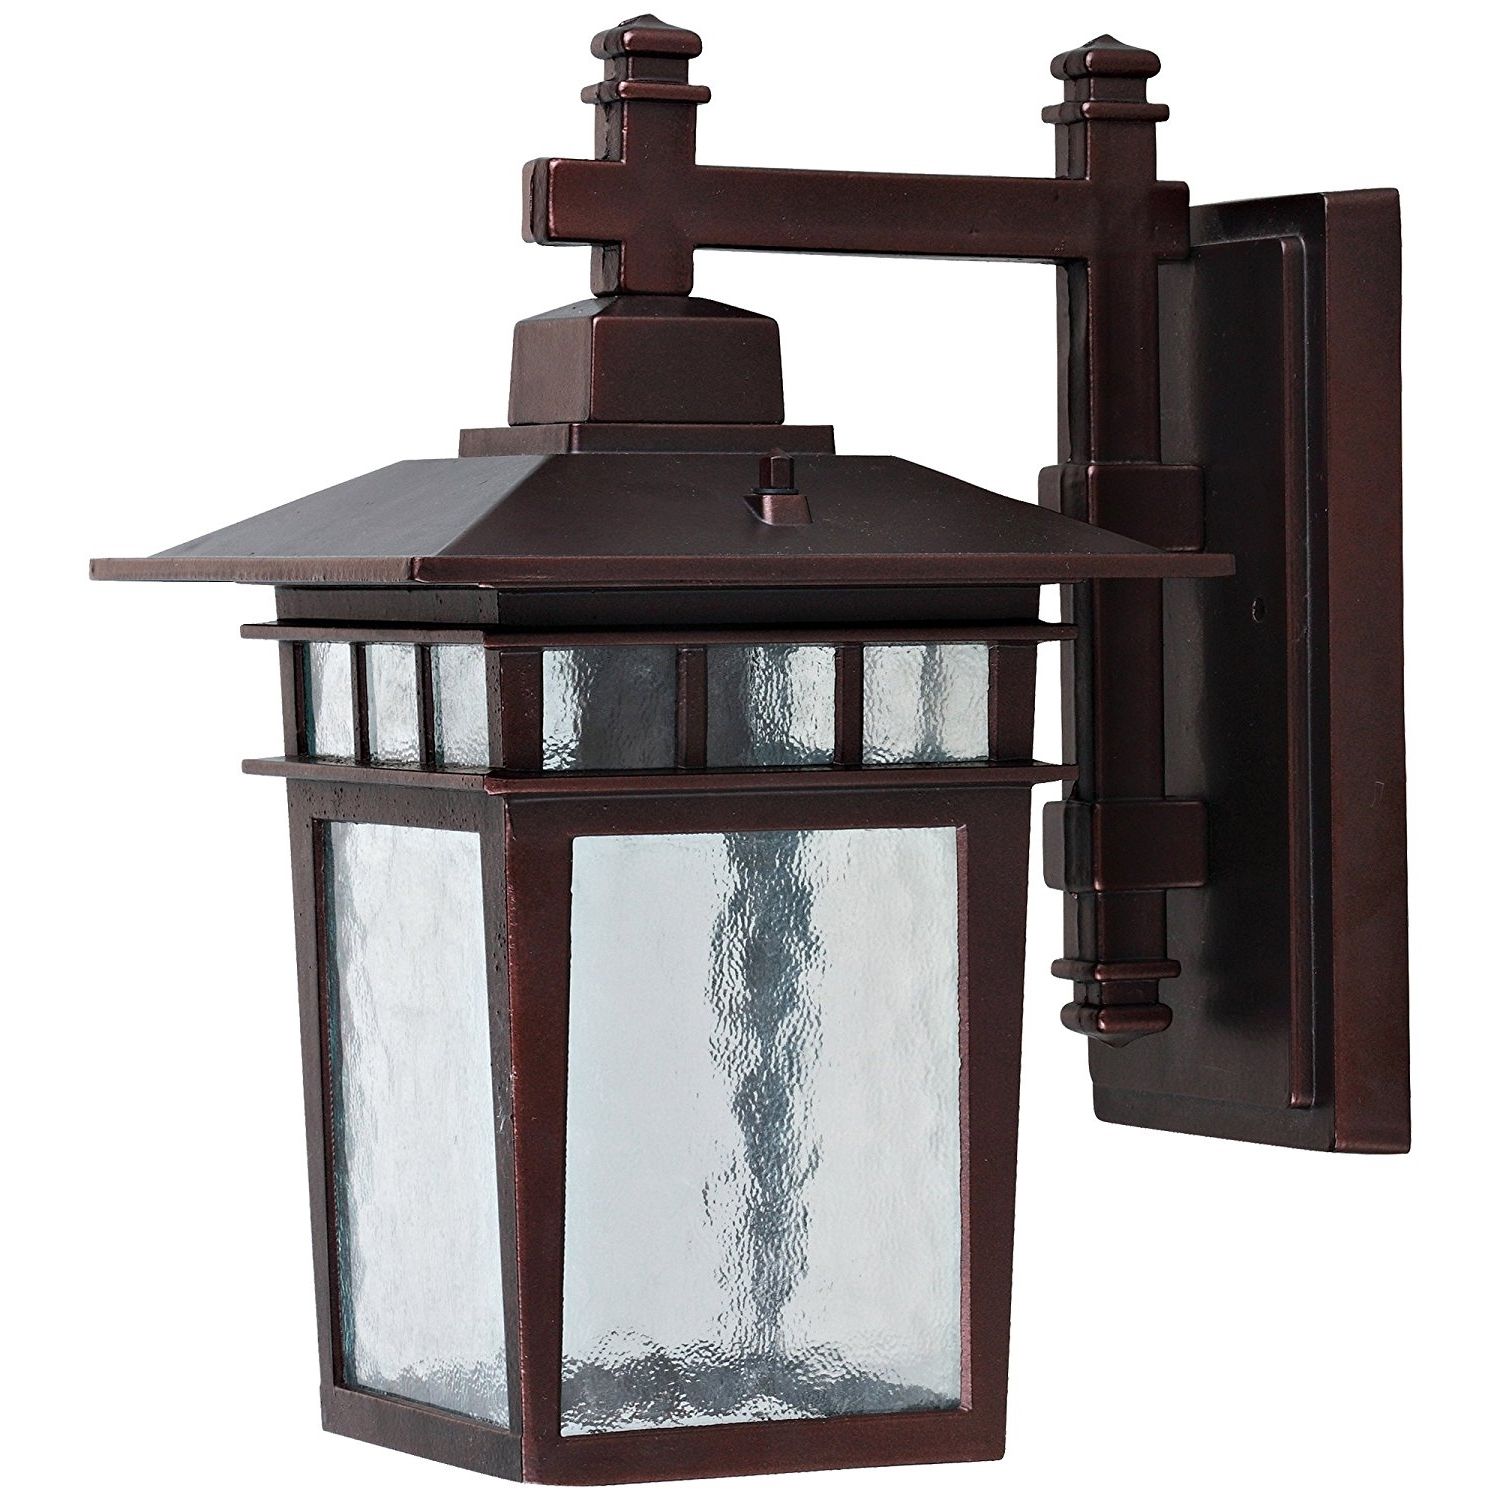 Famous Outdoor : Indoor Wall Sconces Home Depot Landscape Lighting World In Outdoor Wall Lighting At Wayfair (View 7 of 20)